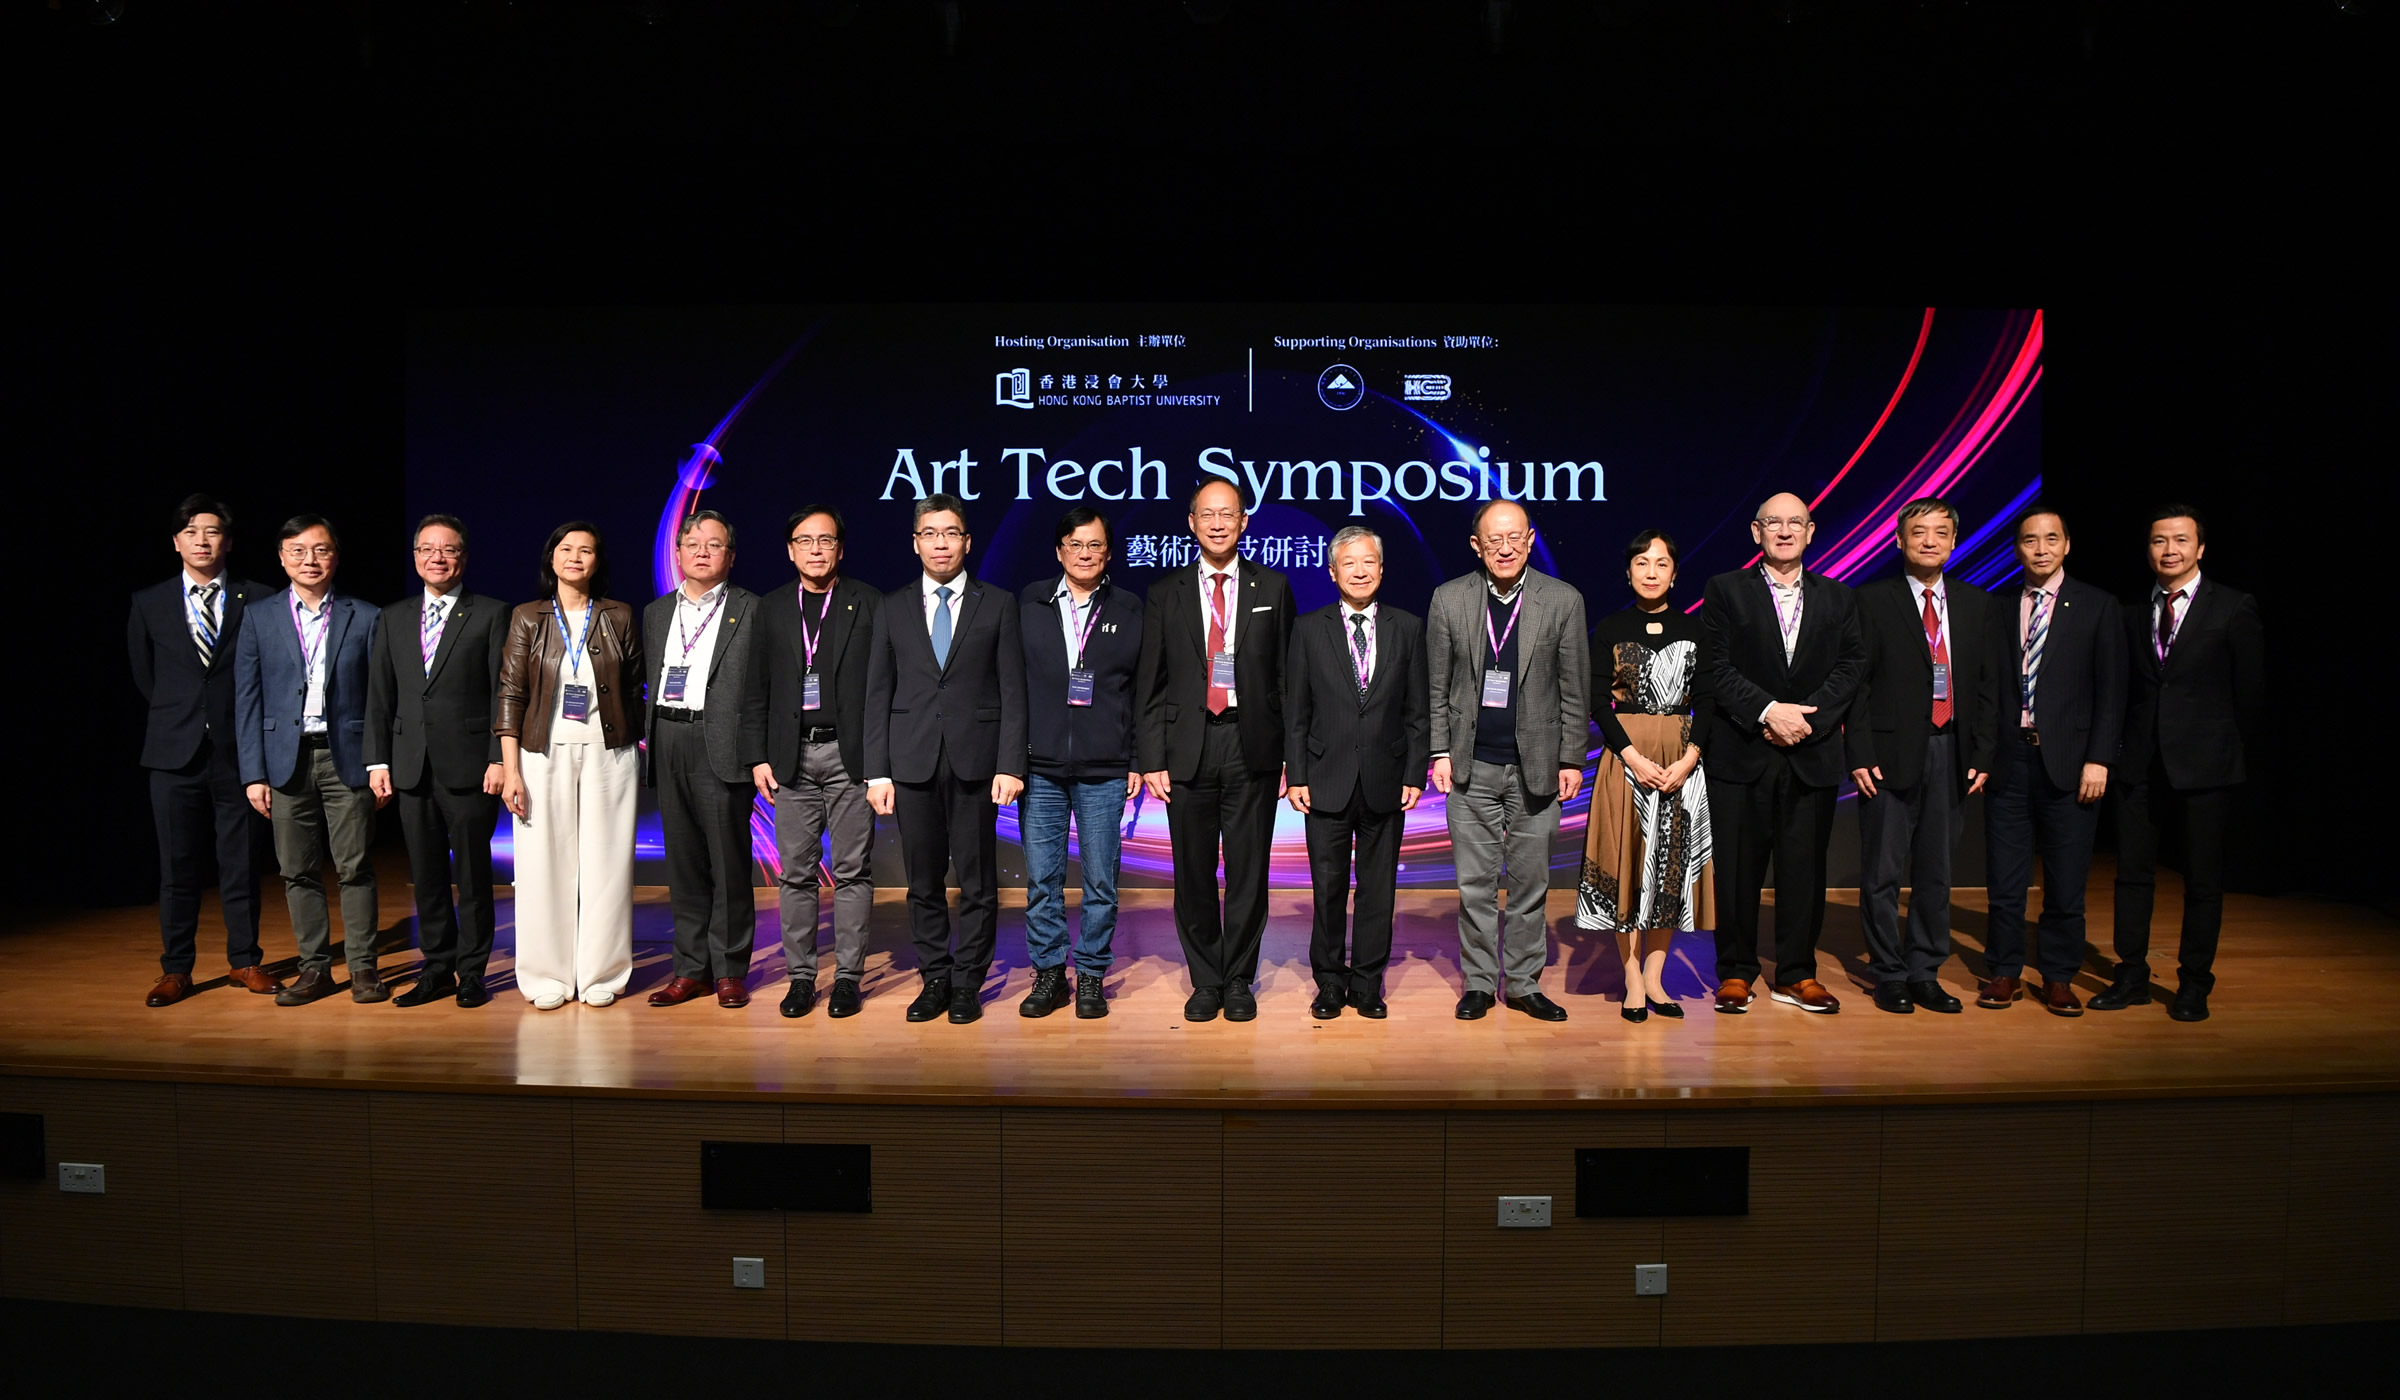 HKBU Art Tech Symposium Brought Together Art Tech Leaders to Explore the Future of Arts